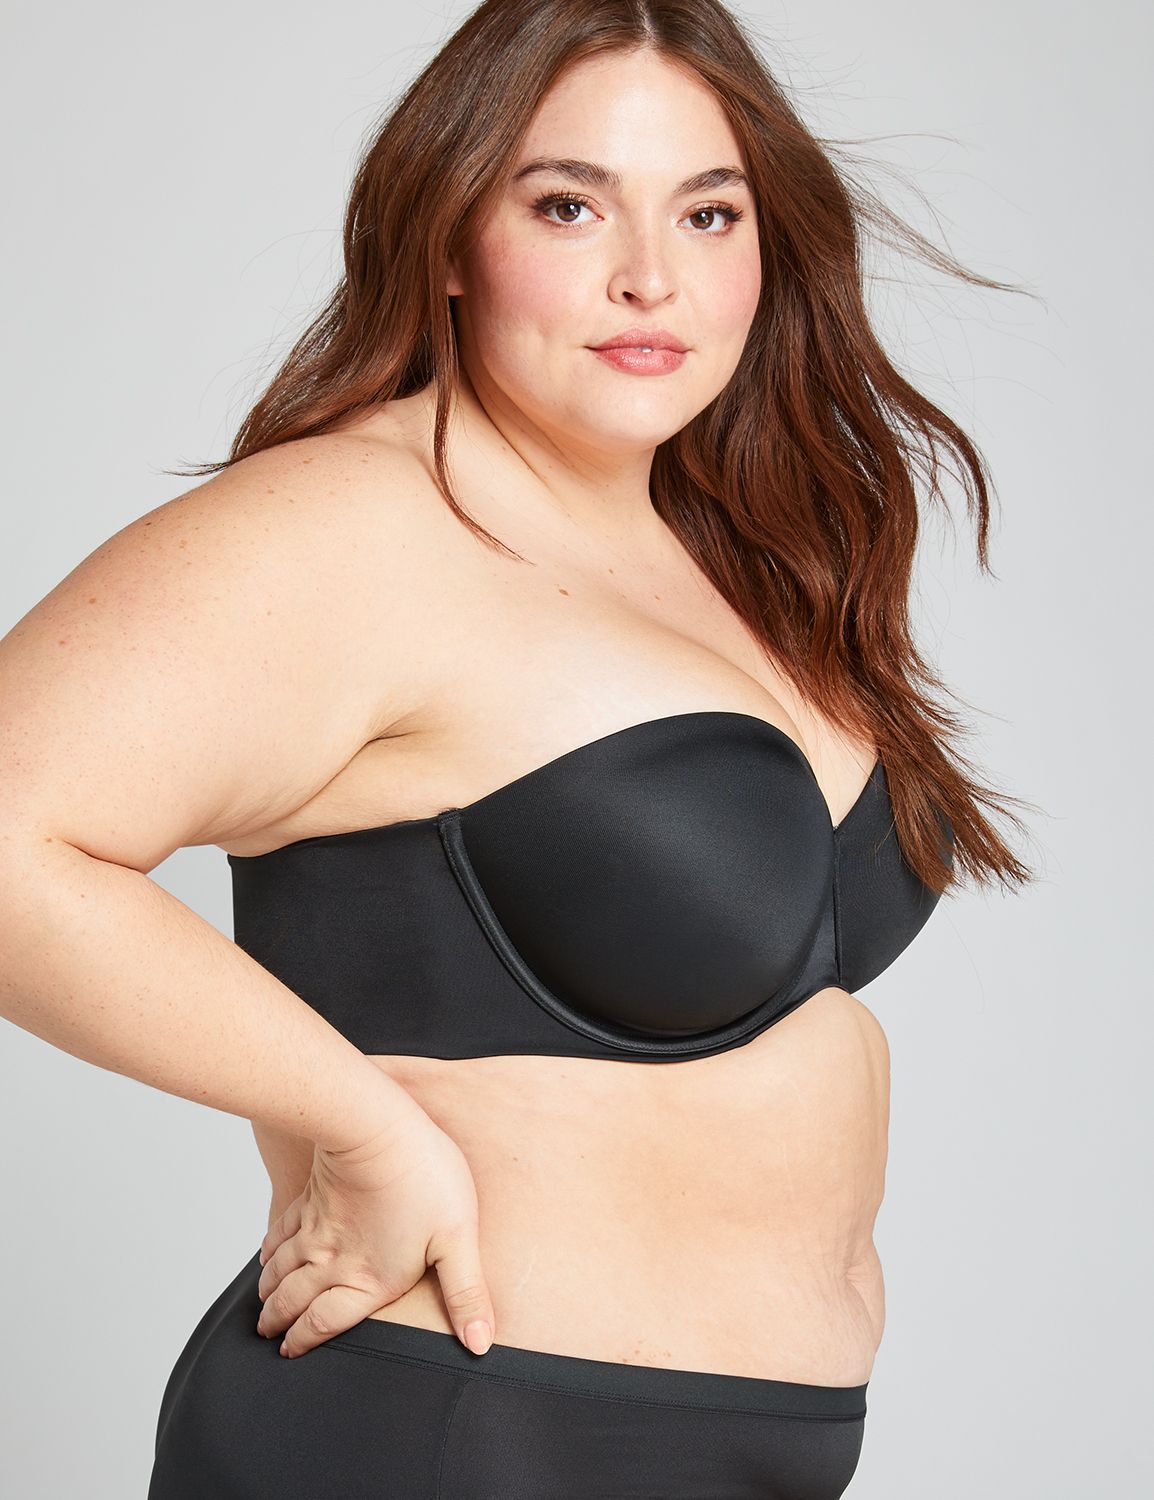 Lane Bryant Cacique Black Lightly Lined Multi Way Strapless in 44DD Size  undefined - $15 - From Mary